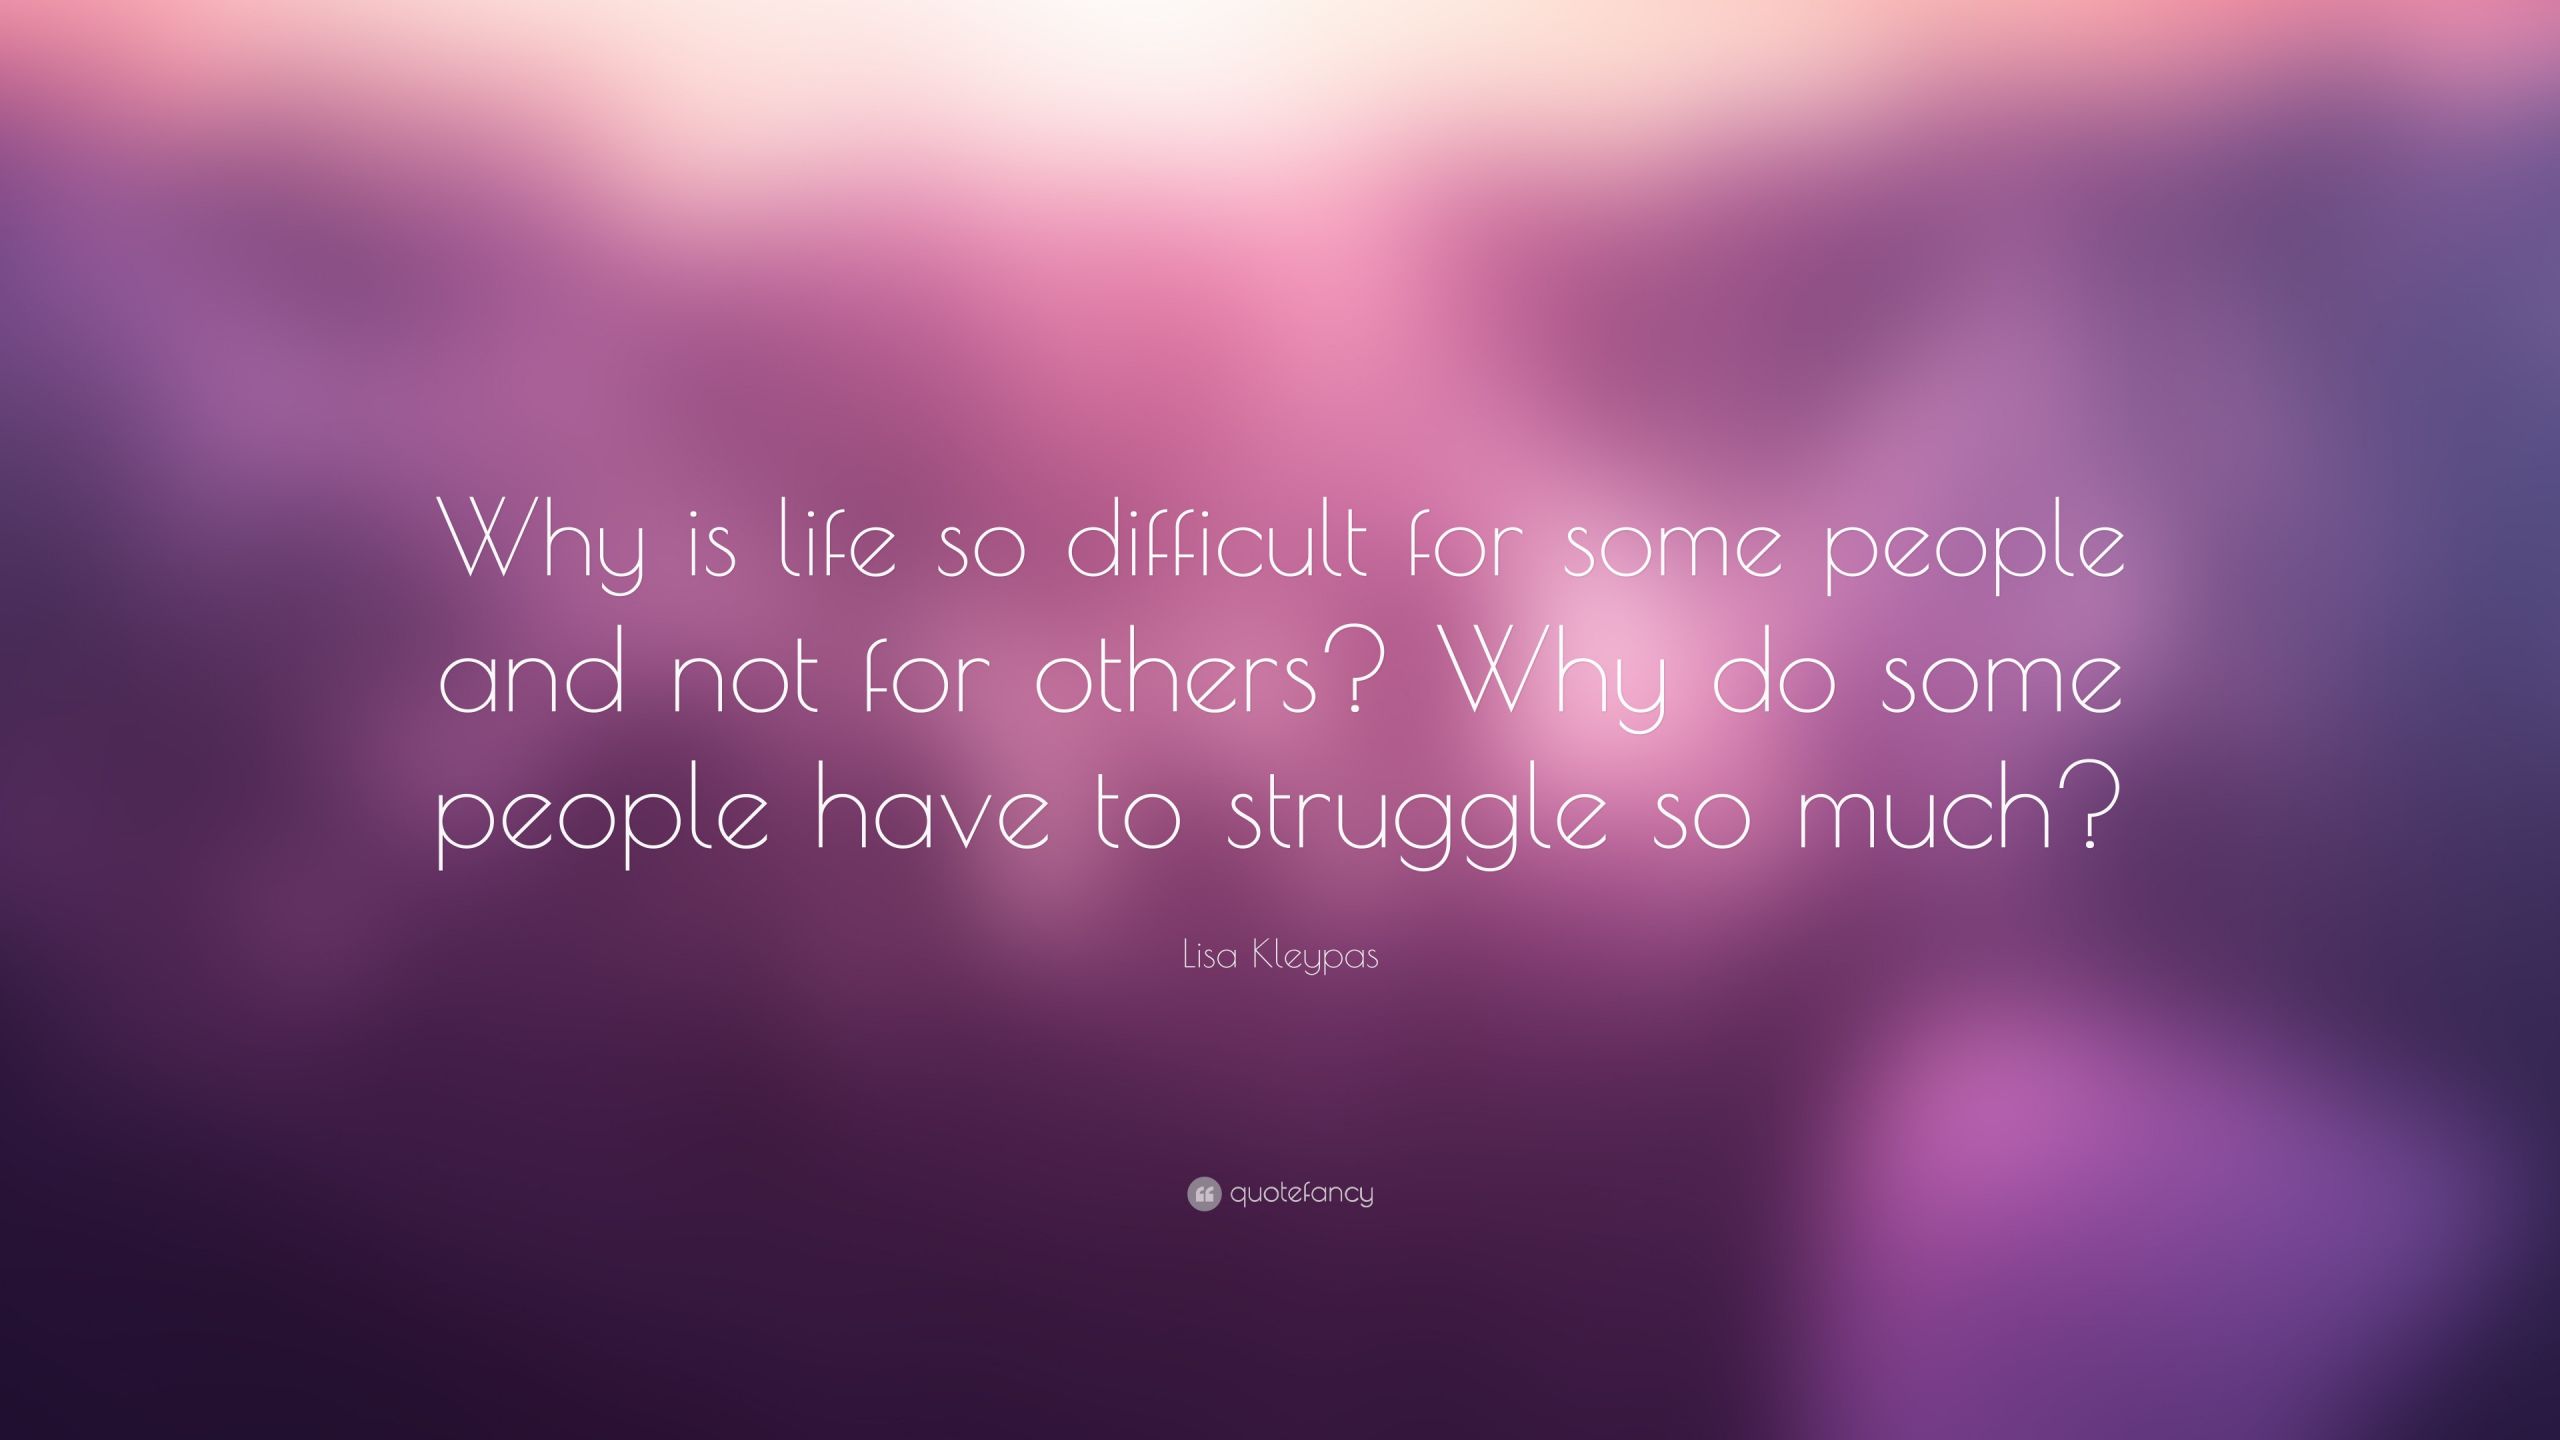 Why Is Life So Hard Quotes
 Lisa Kleypas Quote “Why is life so difficult for some